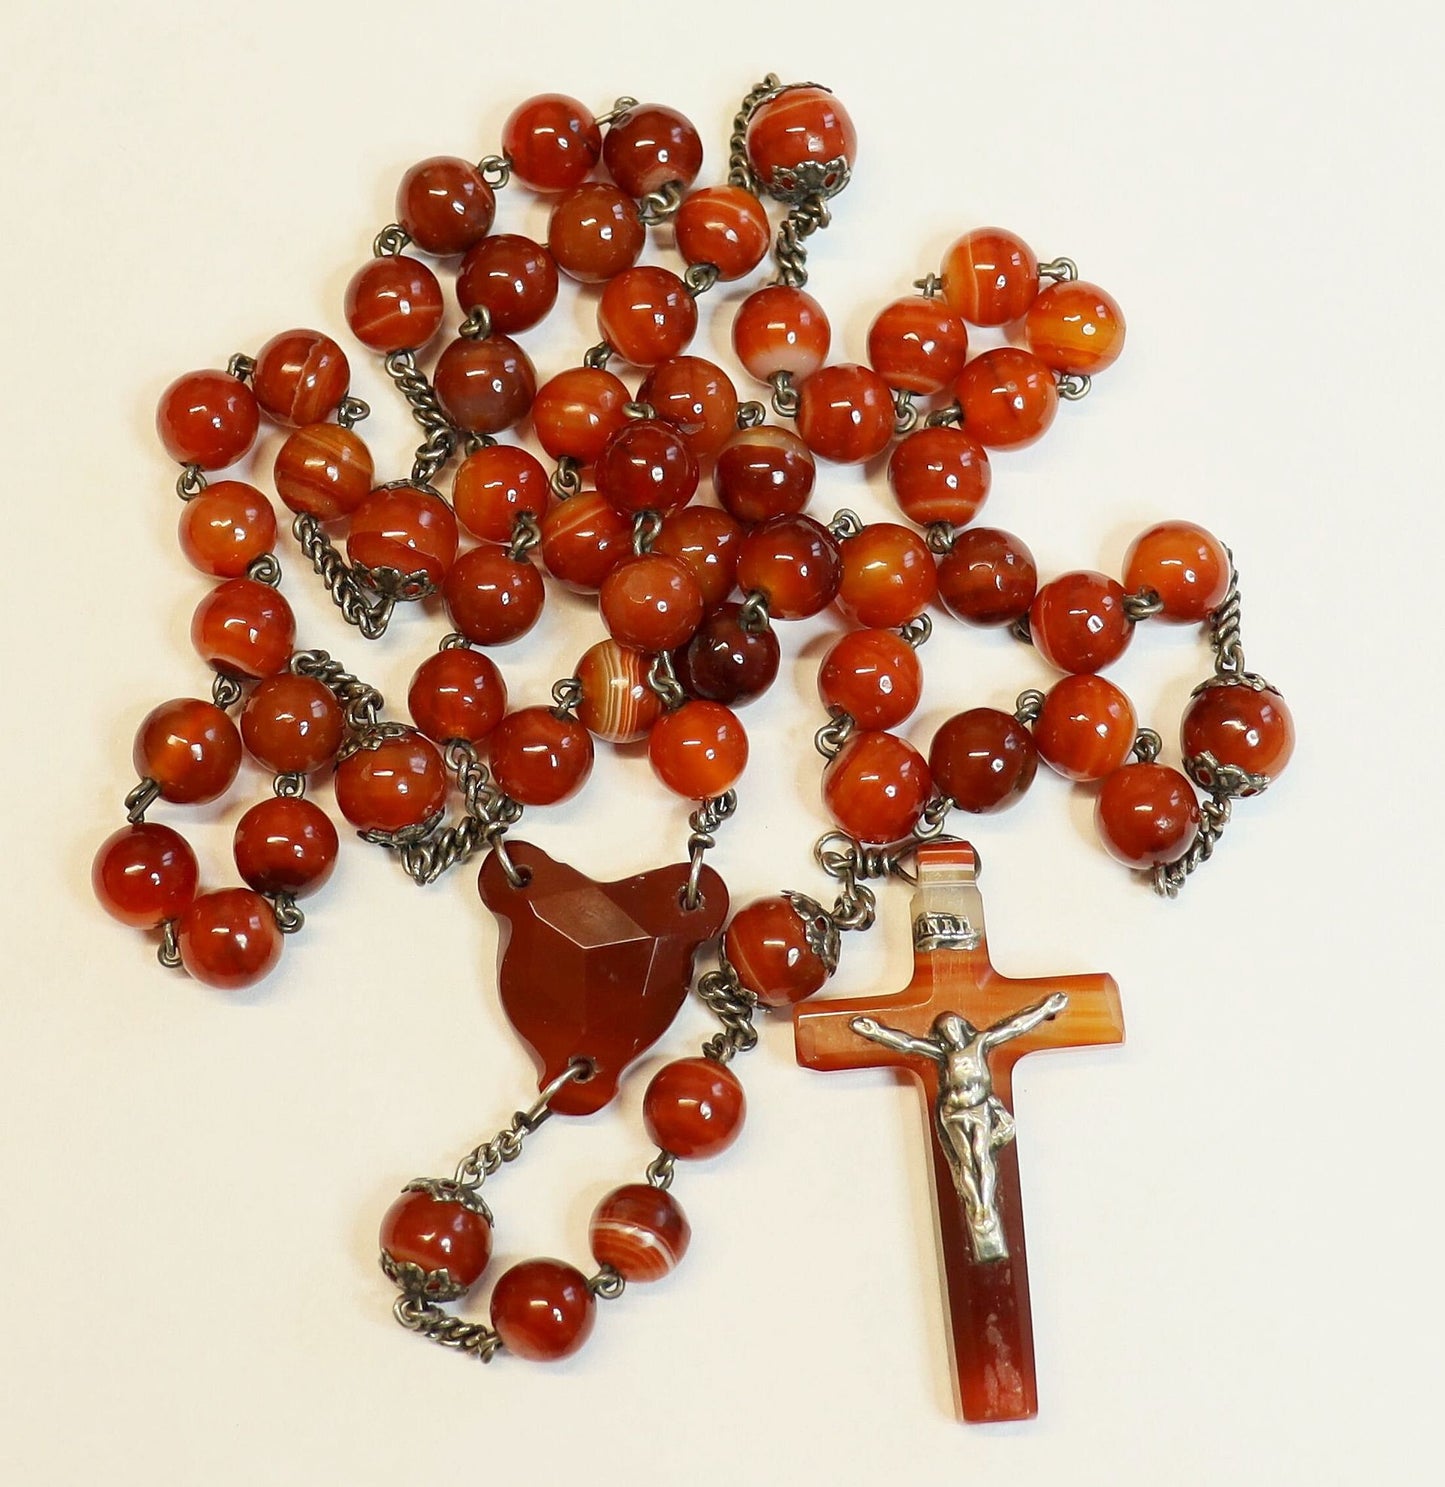 Early 20th Century Carnelian and Sterling Silver Catholic Rosary with Carnelian Center and Crucifix - Rare Collector's item